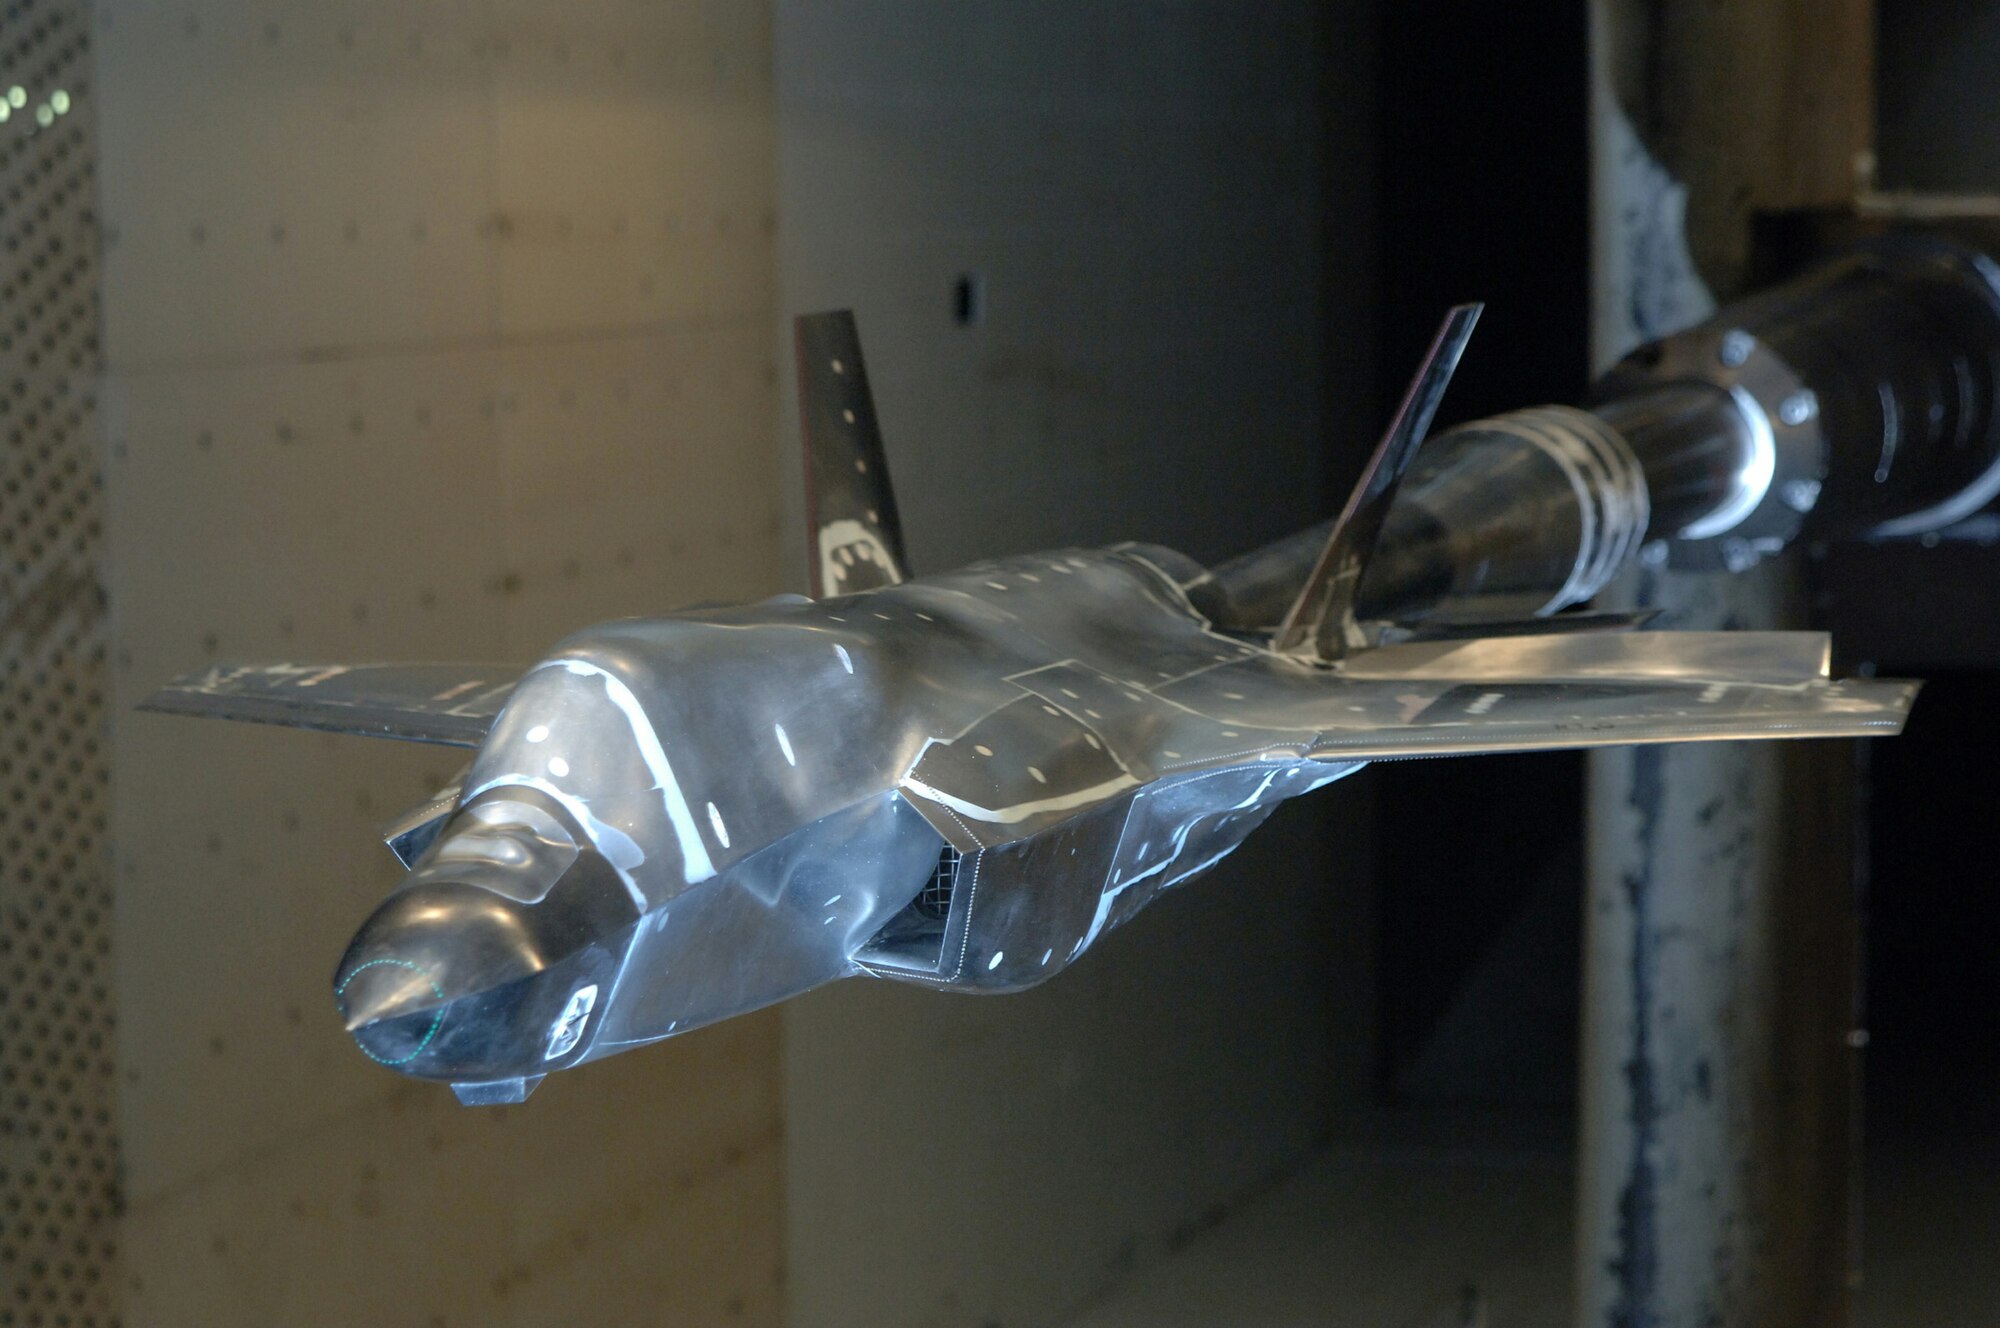 A 12-percent model of the Short Takeoff/Vertical Landing (STOVL) version of the F-35 Lightning II is undergoing aerodynamic loads testing in AEDC’s 16-foot transonic wind tunnel. The information from this testing, the final entry in a series of tests, will go into a large database to refine and validate the aircraft designs for flight testing and ultimately, production of the CTOL and STOVL variants.